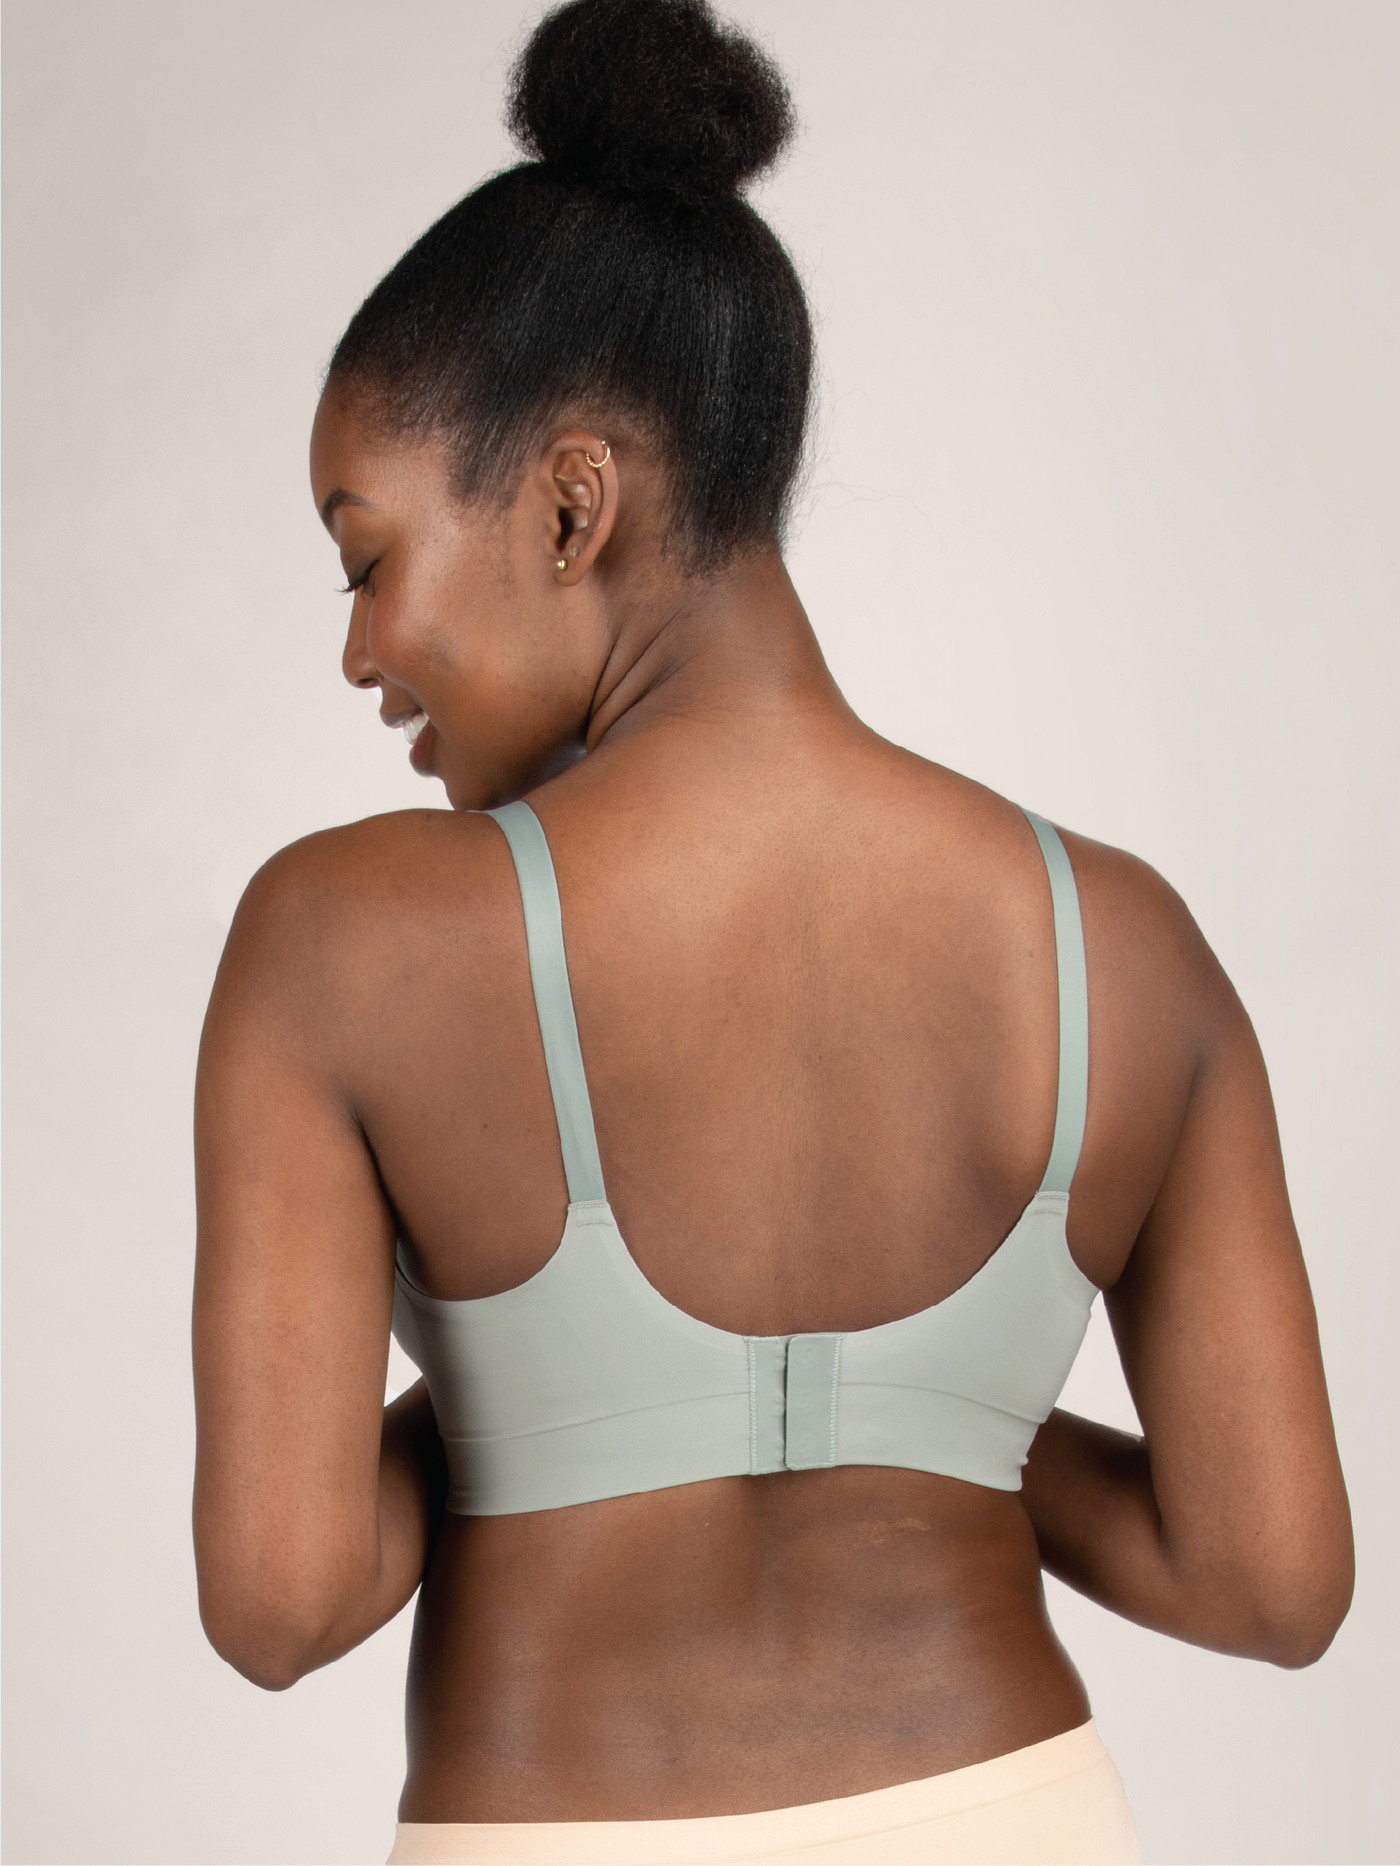 Nursing Bras for Every Body: Inclusivity and Diversity in Lactation Apparel  – Bmama Maternity